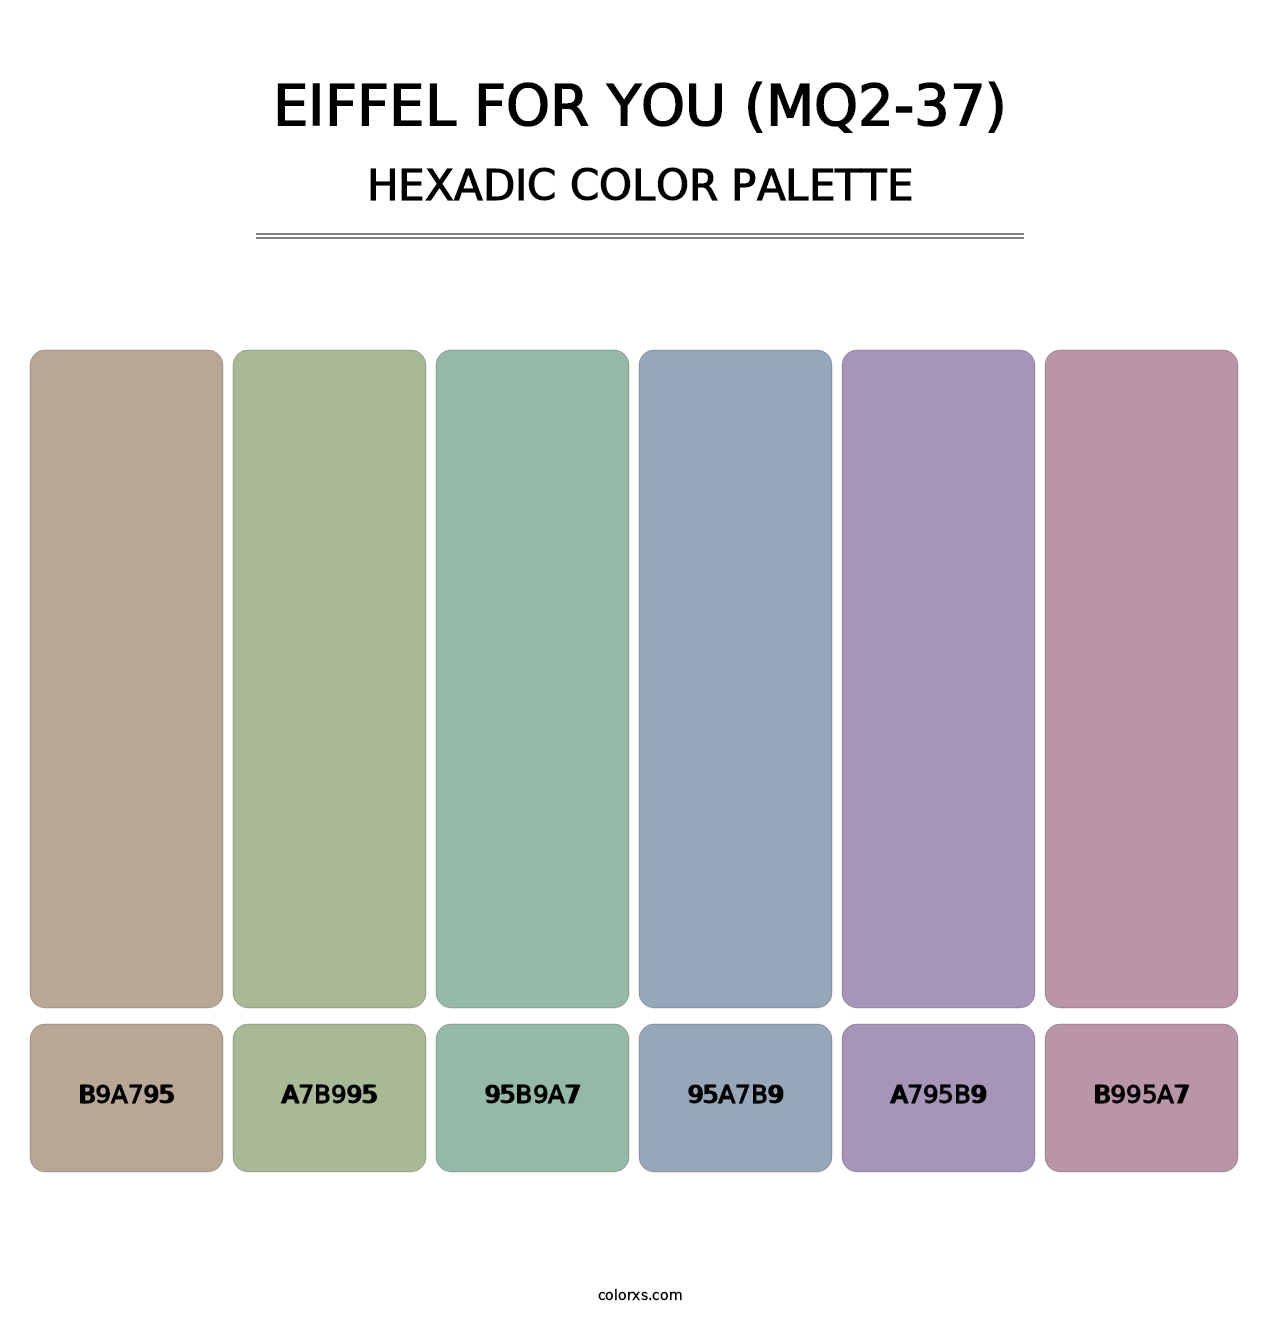 Eiffel For You (MQ2-37) - Hexadic Color Palette